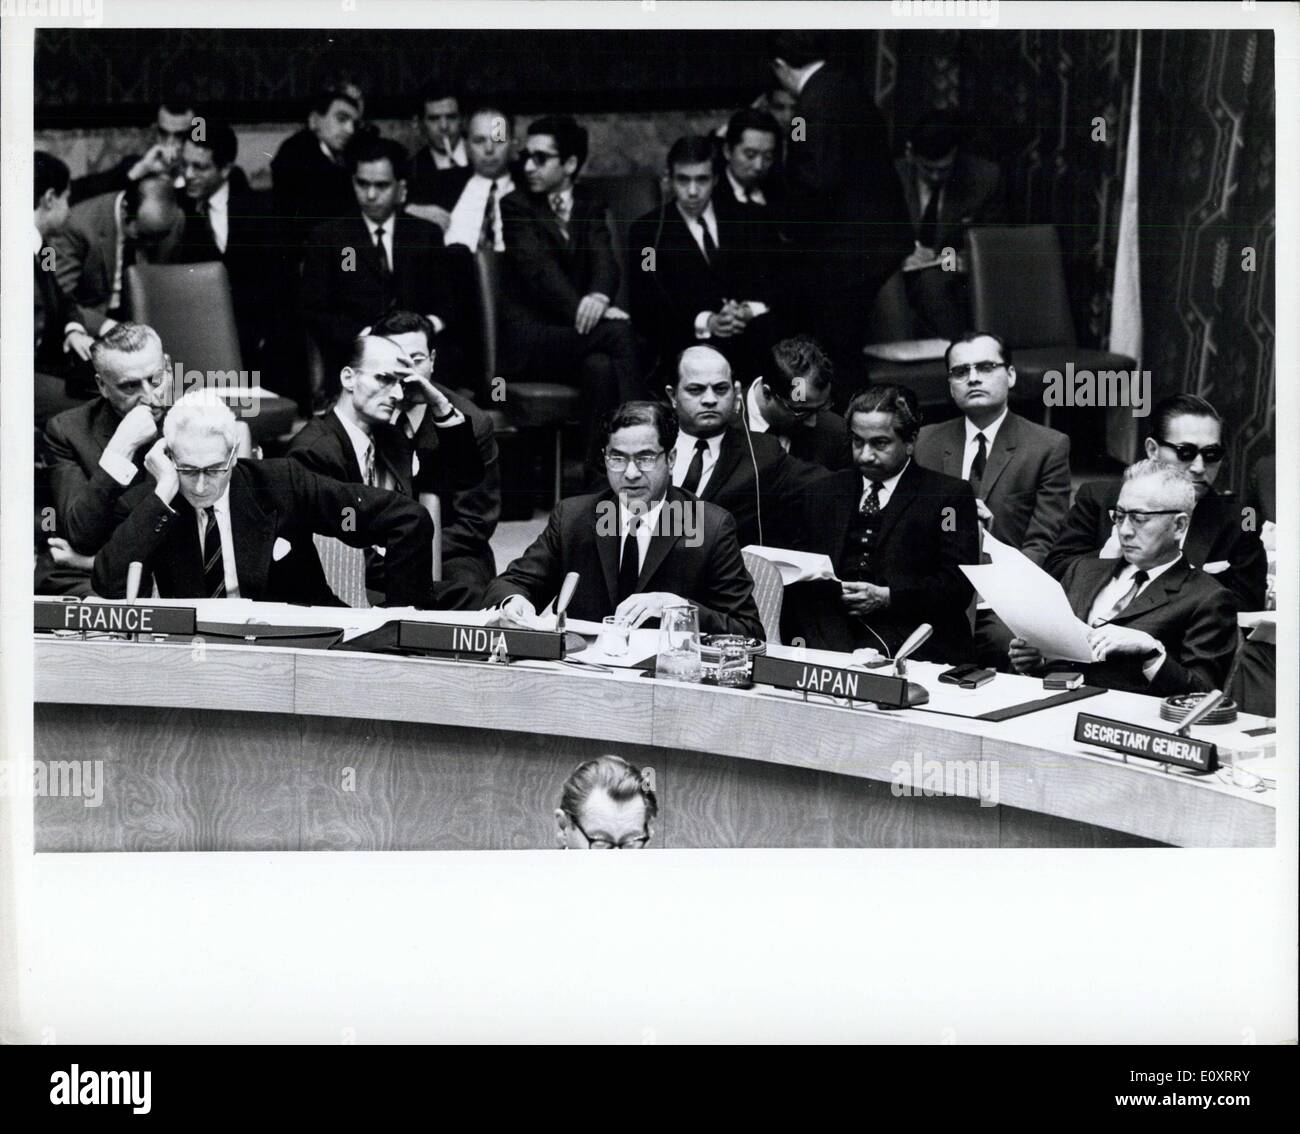 Nov. 09, 1967 - Security Council hears 12 statements on Middle East, receives two drafts resolutions ? United Nations, New York, 9-10 November 1967 The Security Council, in a meeting beginning in the afternoon of Thursday, 9 November, and ending early Friday, 10 November, discussed the situation in the Middle East at the request of the United Arab Republic, and heard statements by the United Arab Republic, India, Nigeria, Soviet Union, United Kingdom, United States, Ethiopia, Canada, Denmark, France, Japan and Argentina. Two draft resolutions were introduced Stock Photo